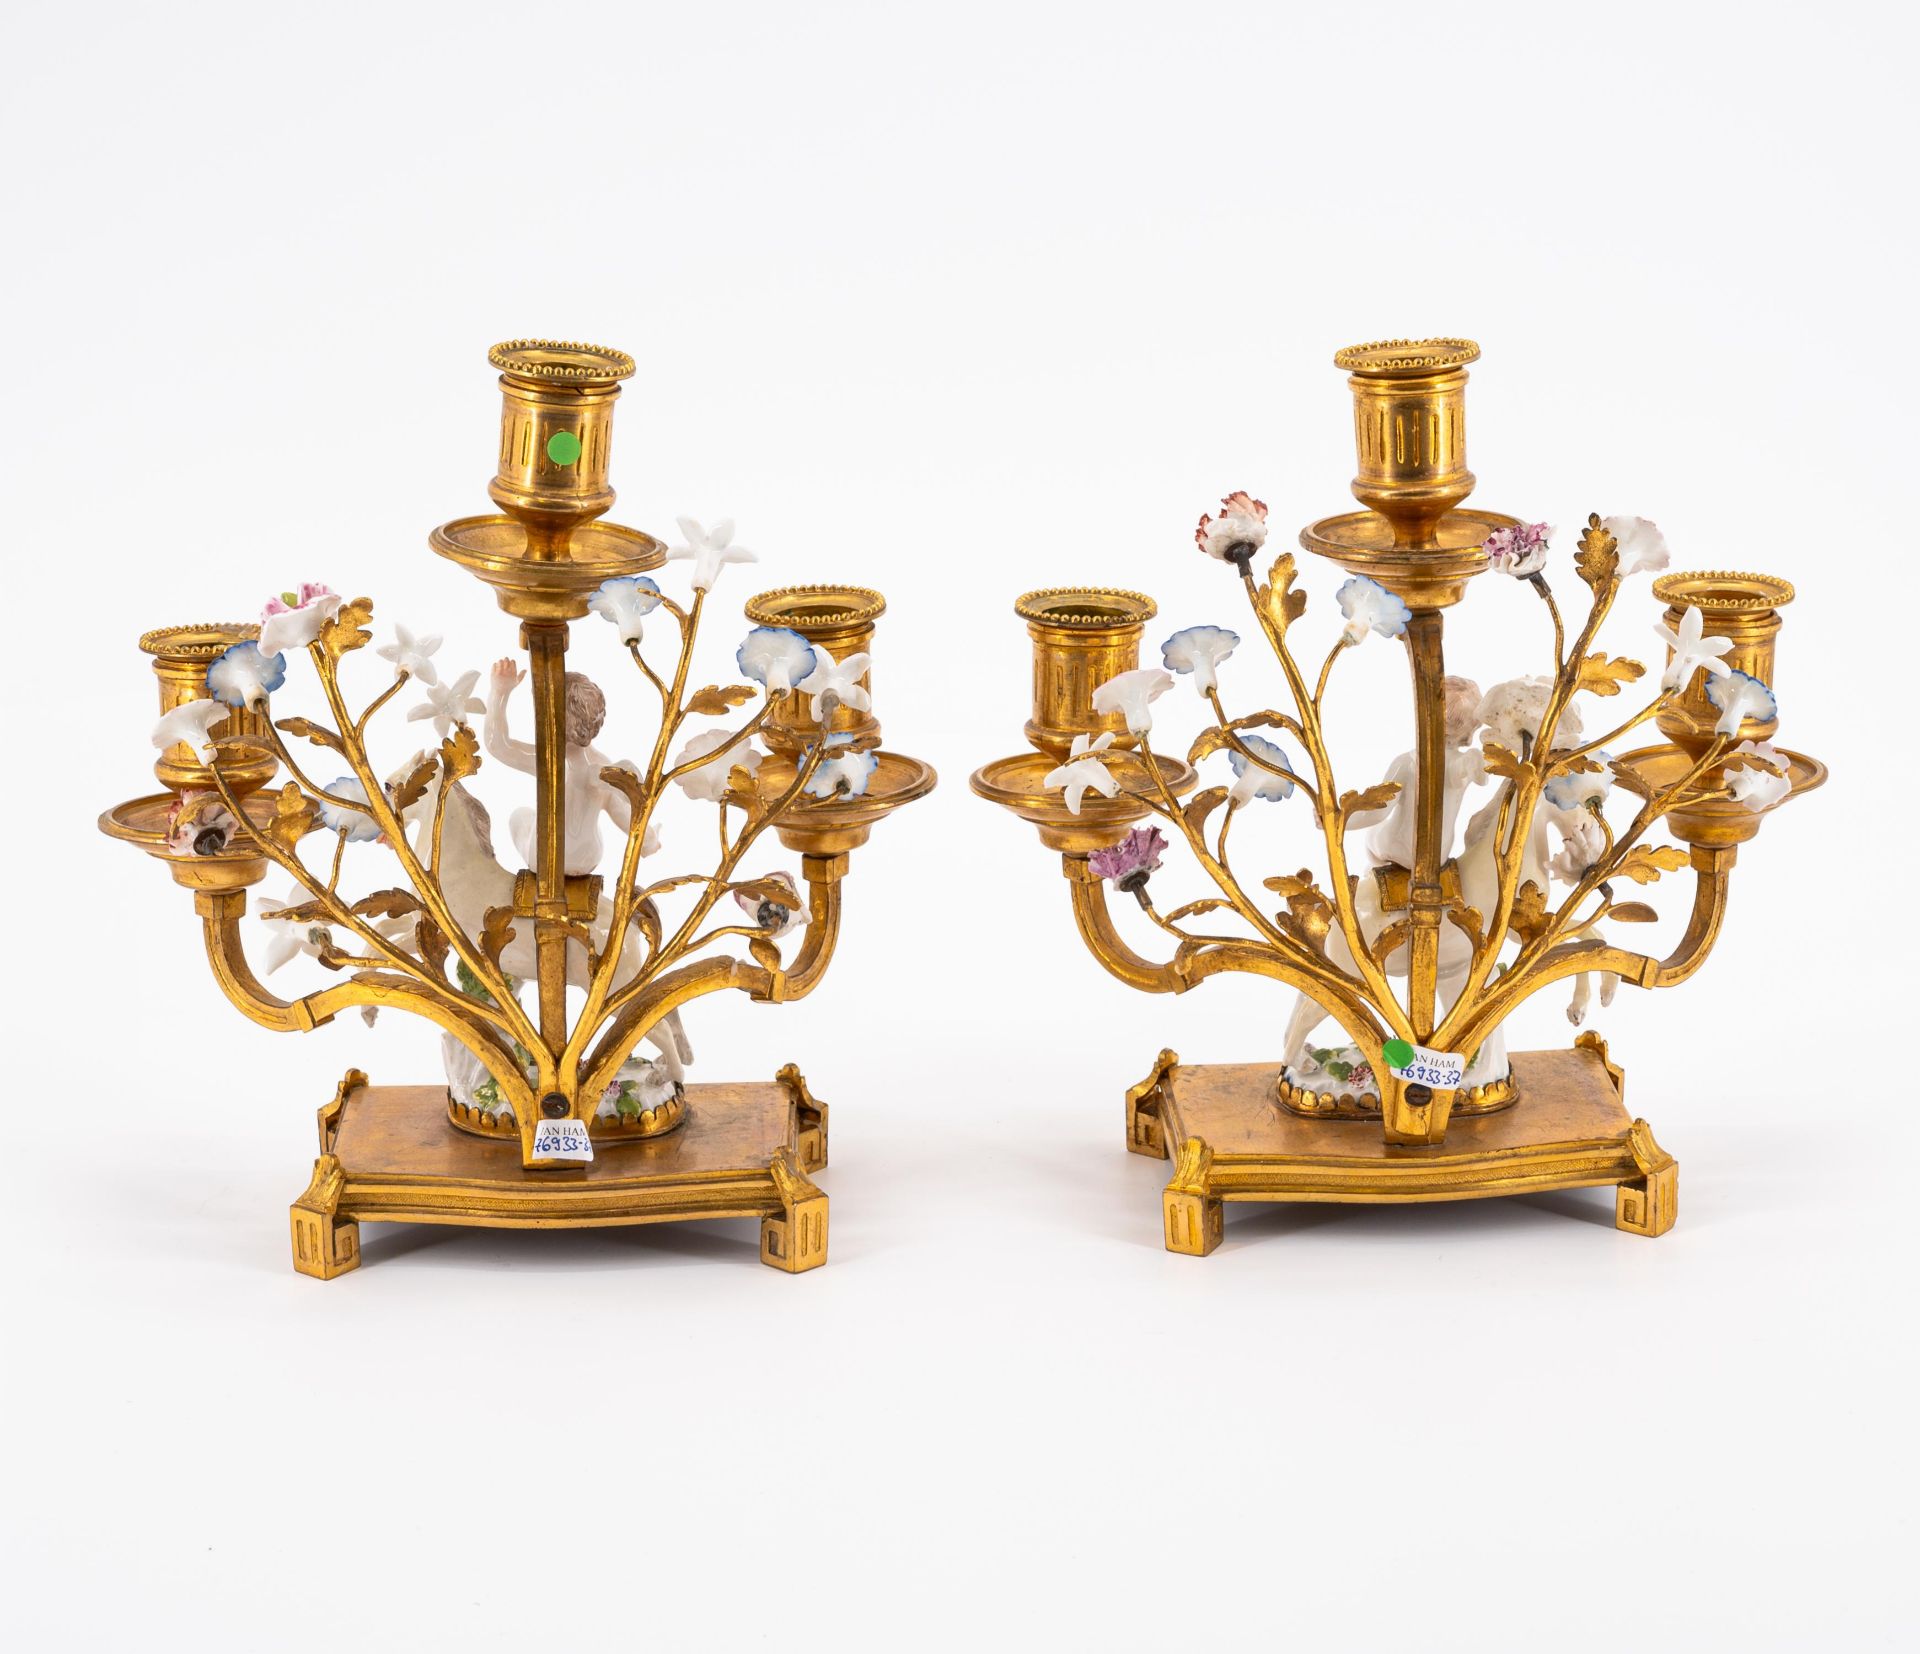 BRONZE PAIR OF THREE-LIGHT CANDLESTICKS WITH CUPIDS RIDING HORSES - Image 4 of 6